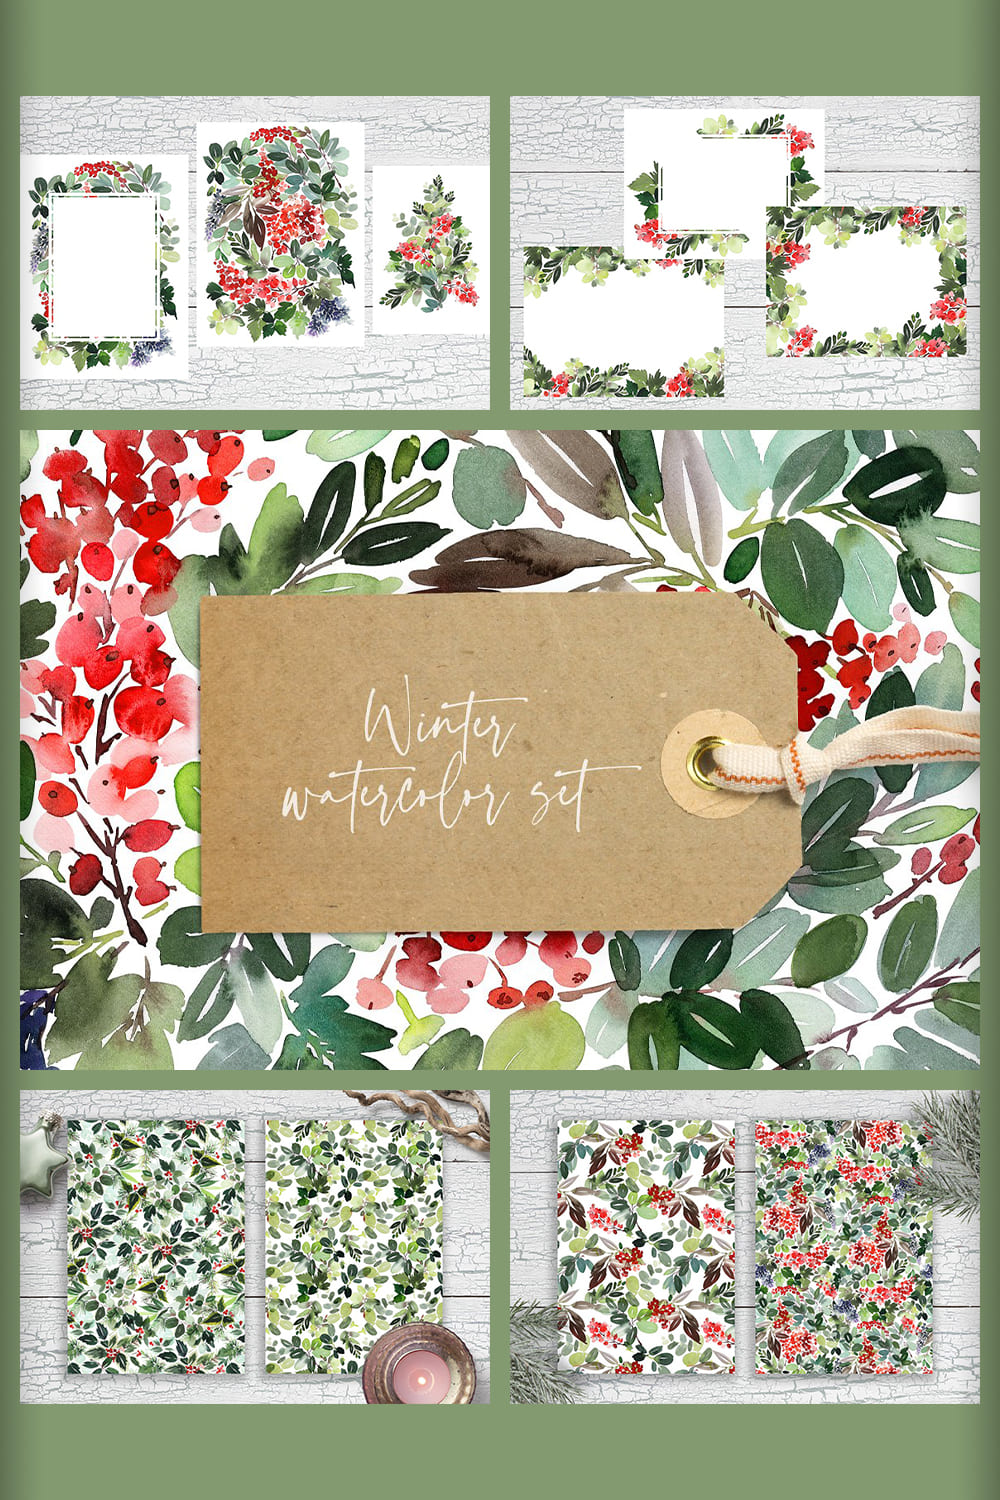 Watercolor frames with flowers.